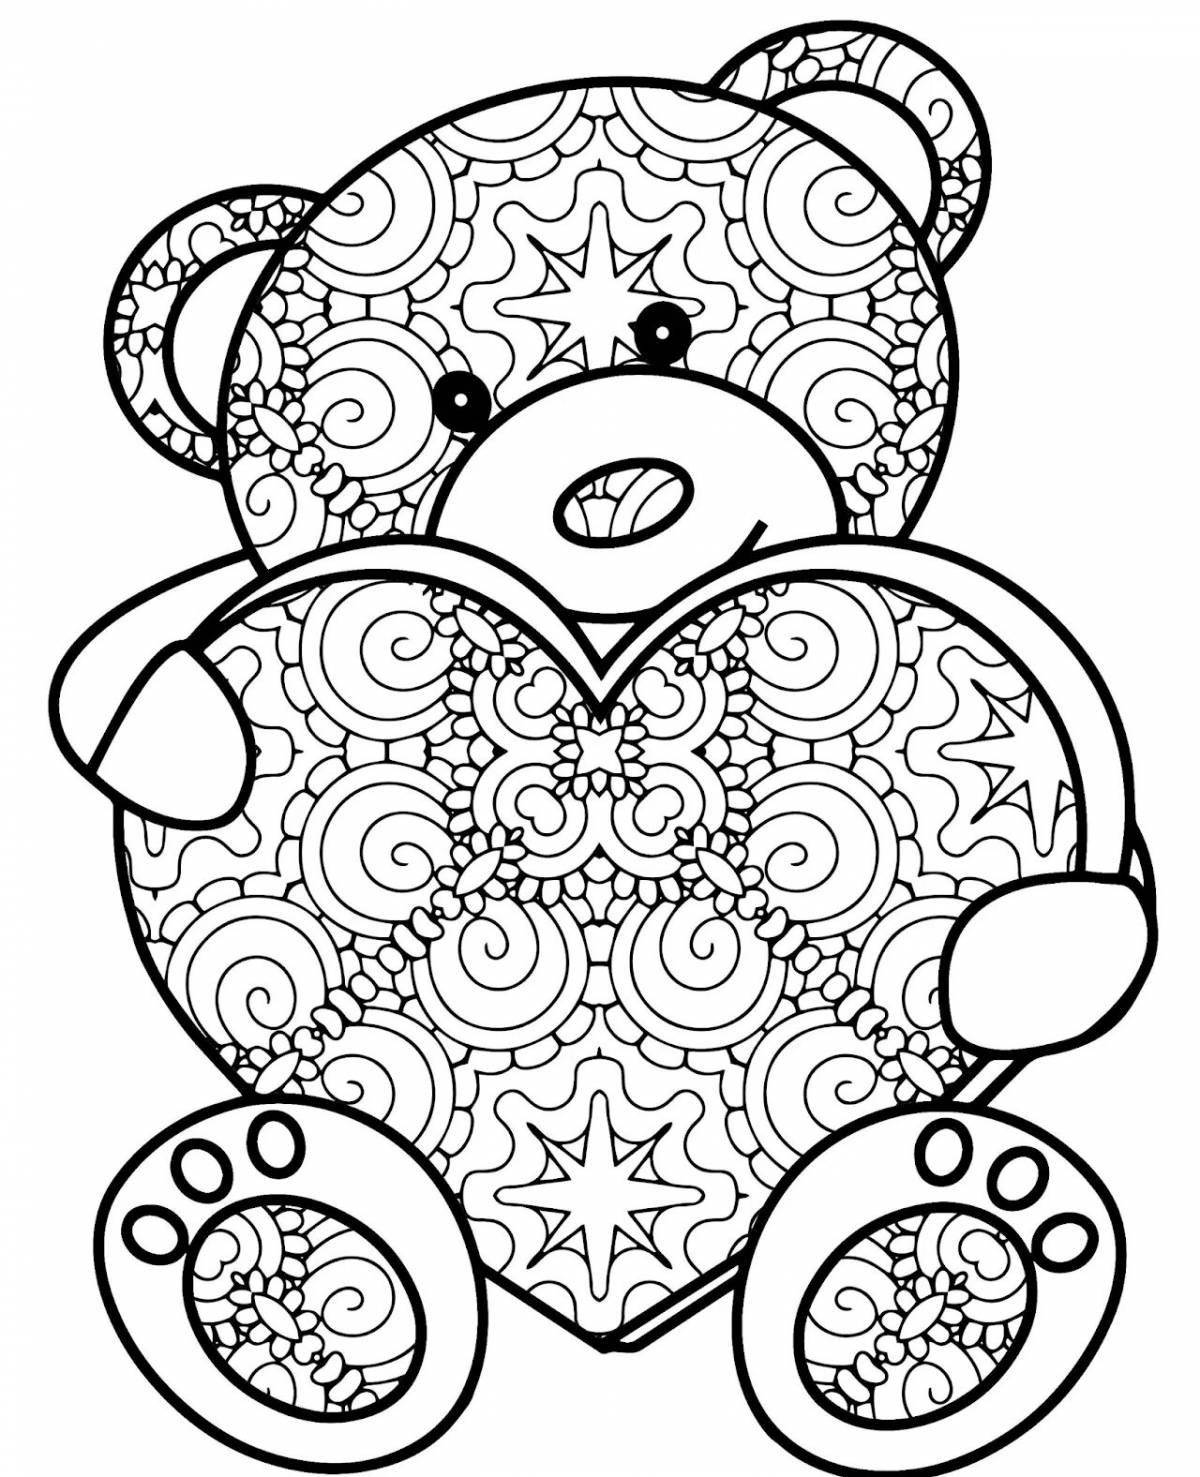 Radiant letter eater antistress coloring page